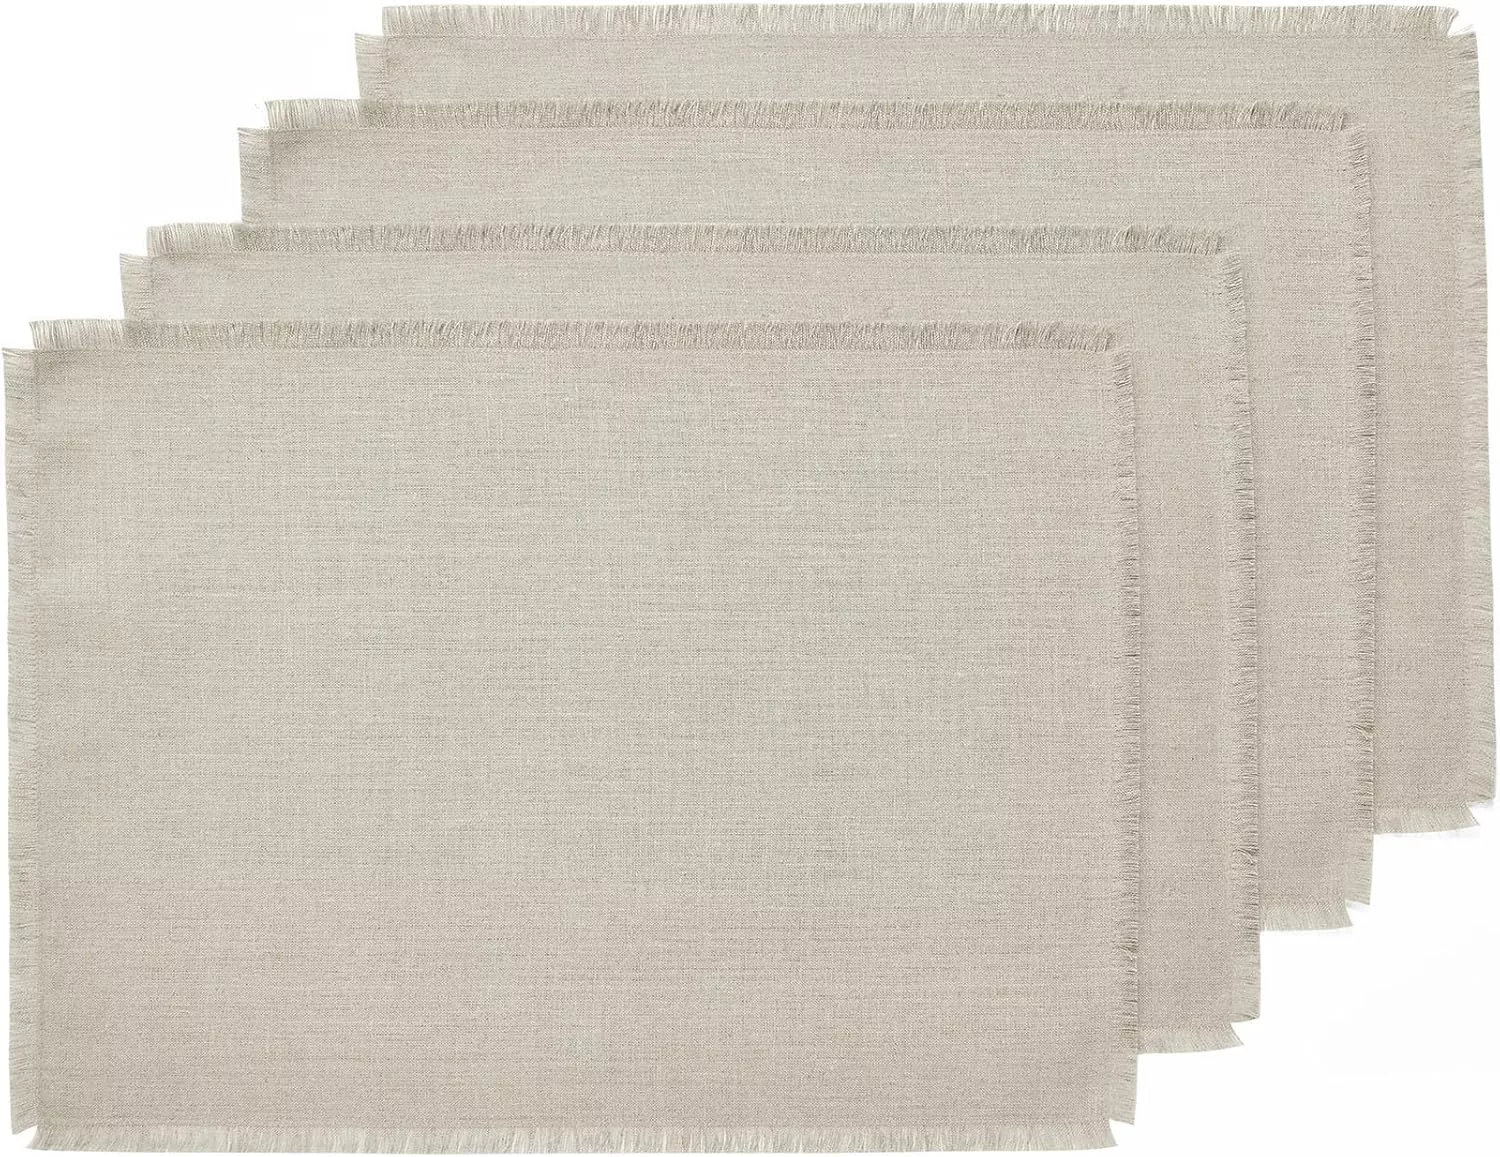 Falling Leaves - 100% Pure Linen Placemats (Set of 4) Solino Home